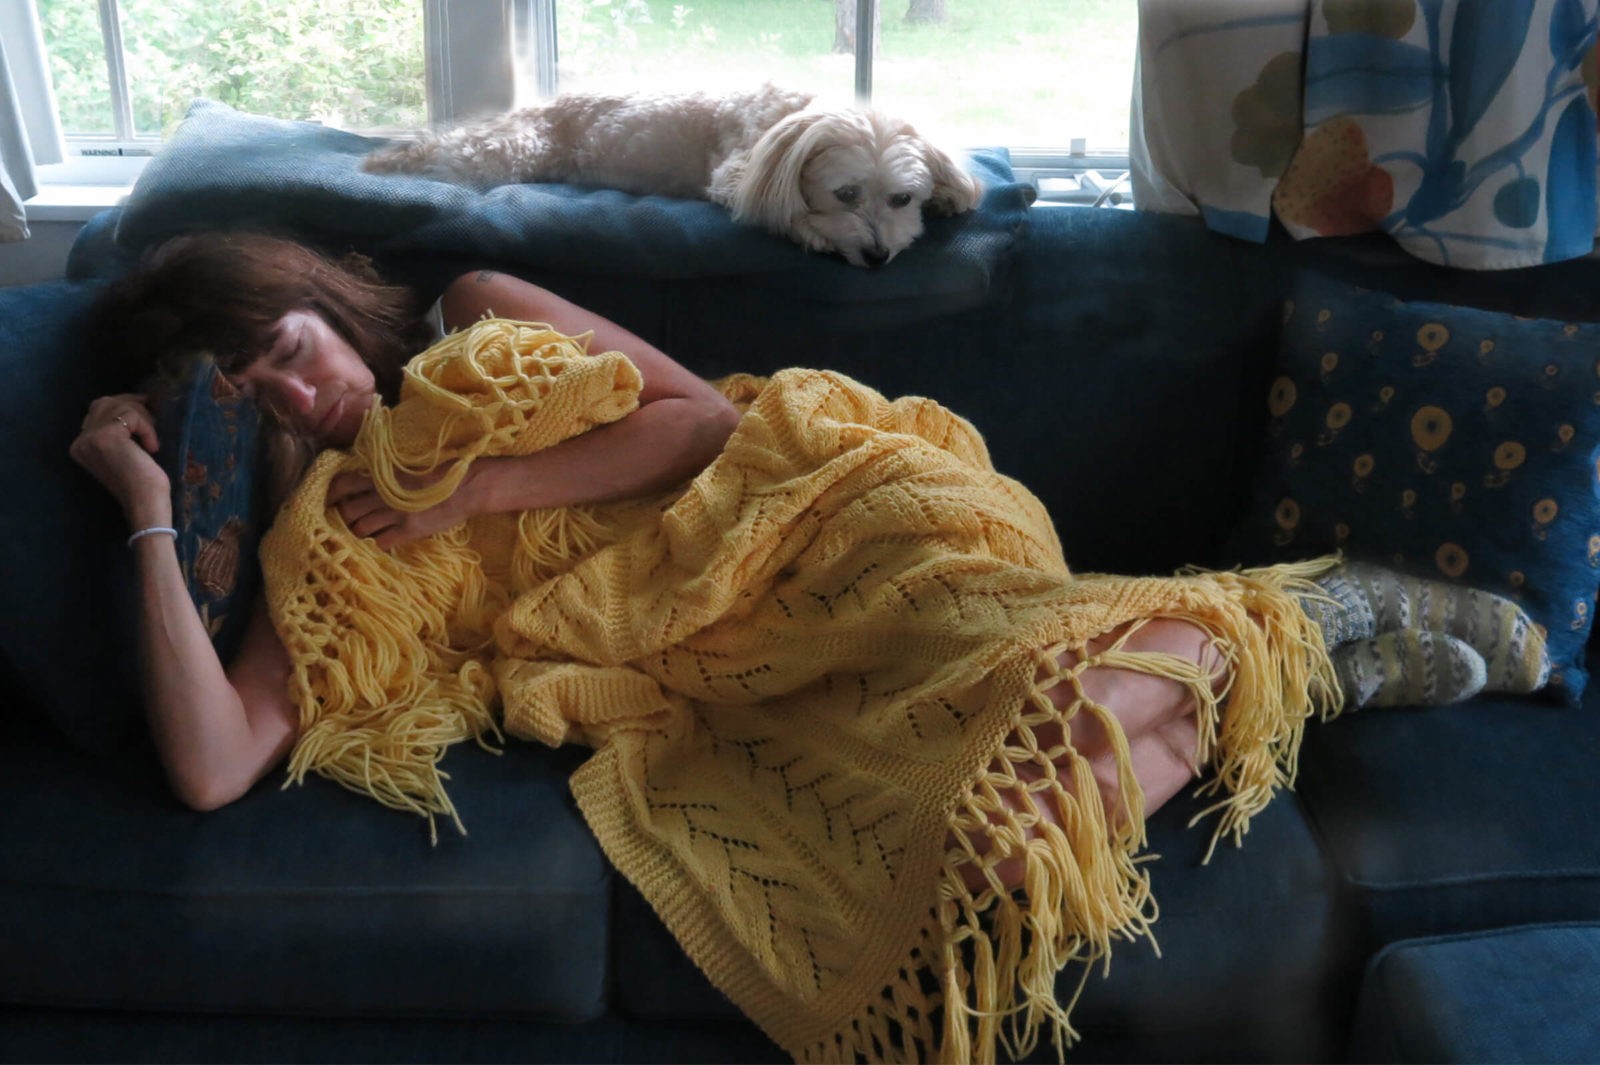 Sick with a cold, Robin Botie of Ithaca, New York, cuddles up with handknit afghan and dog.